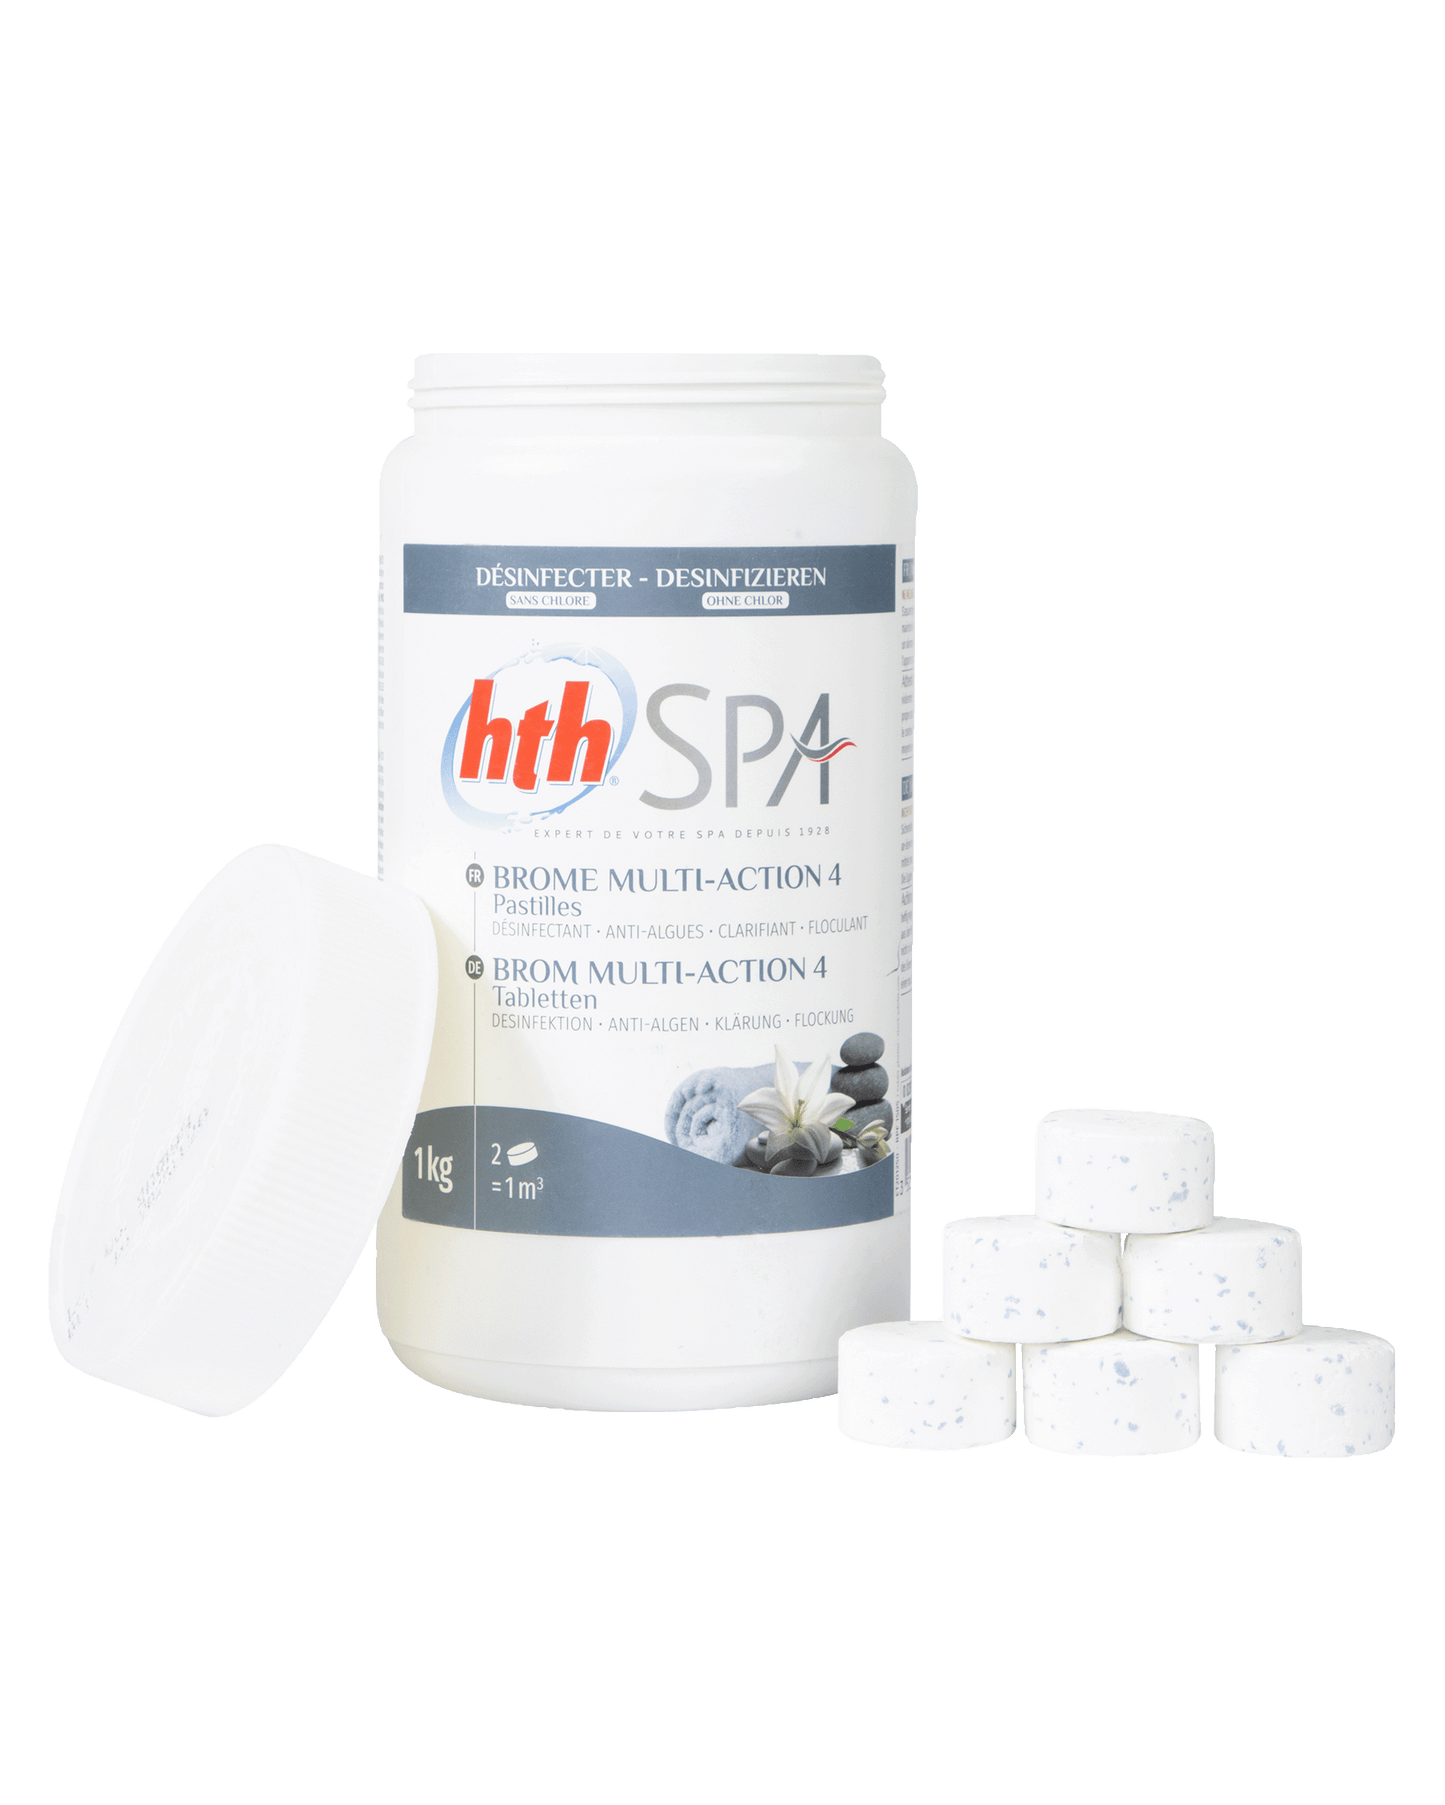 hth Spa BROM MULTI-ACTION 4 TABLETTEN 20 g